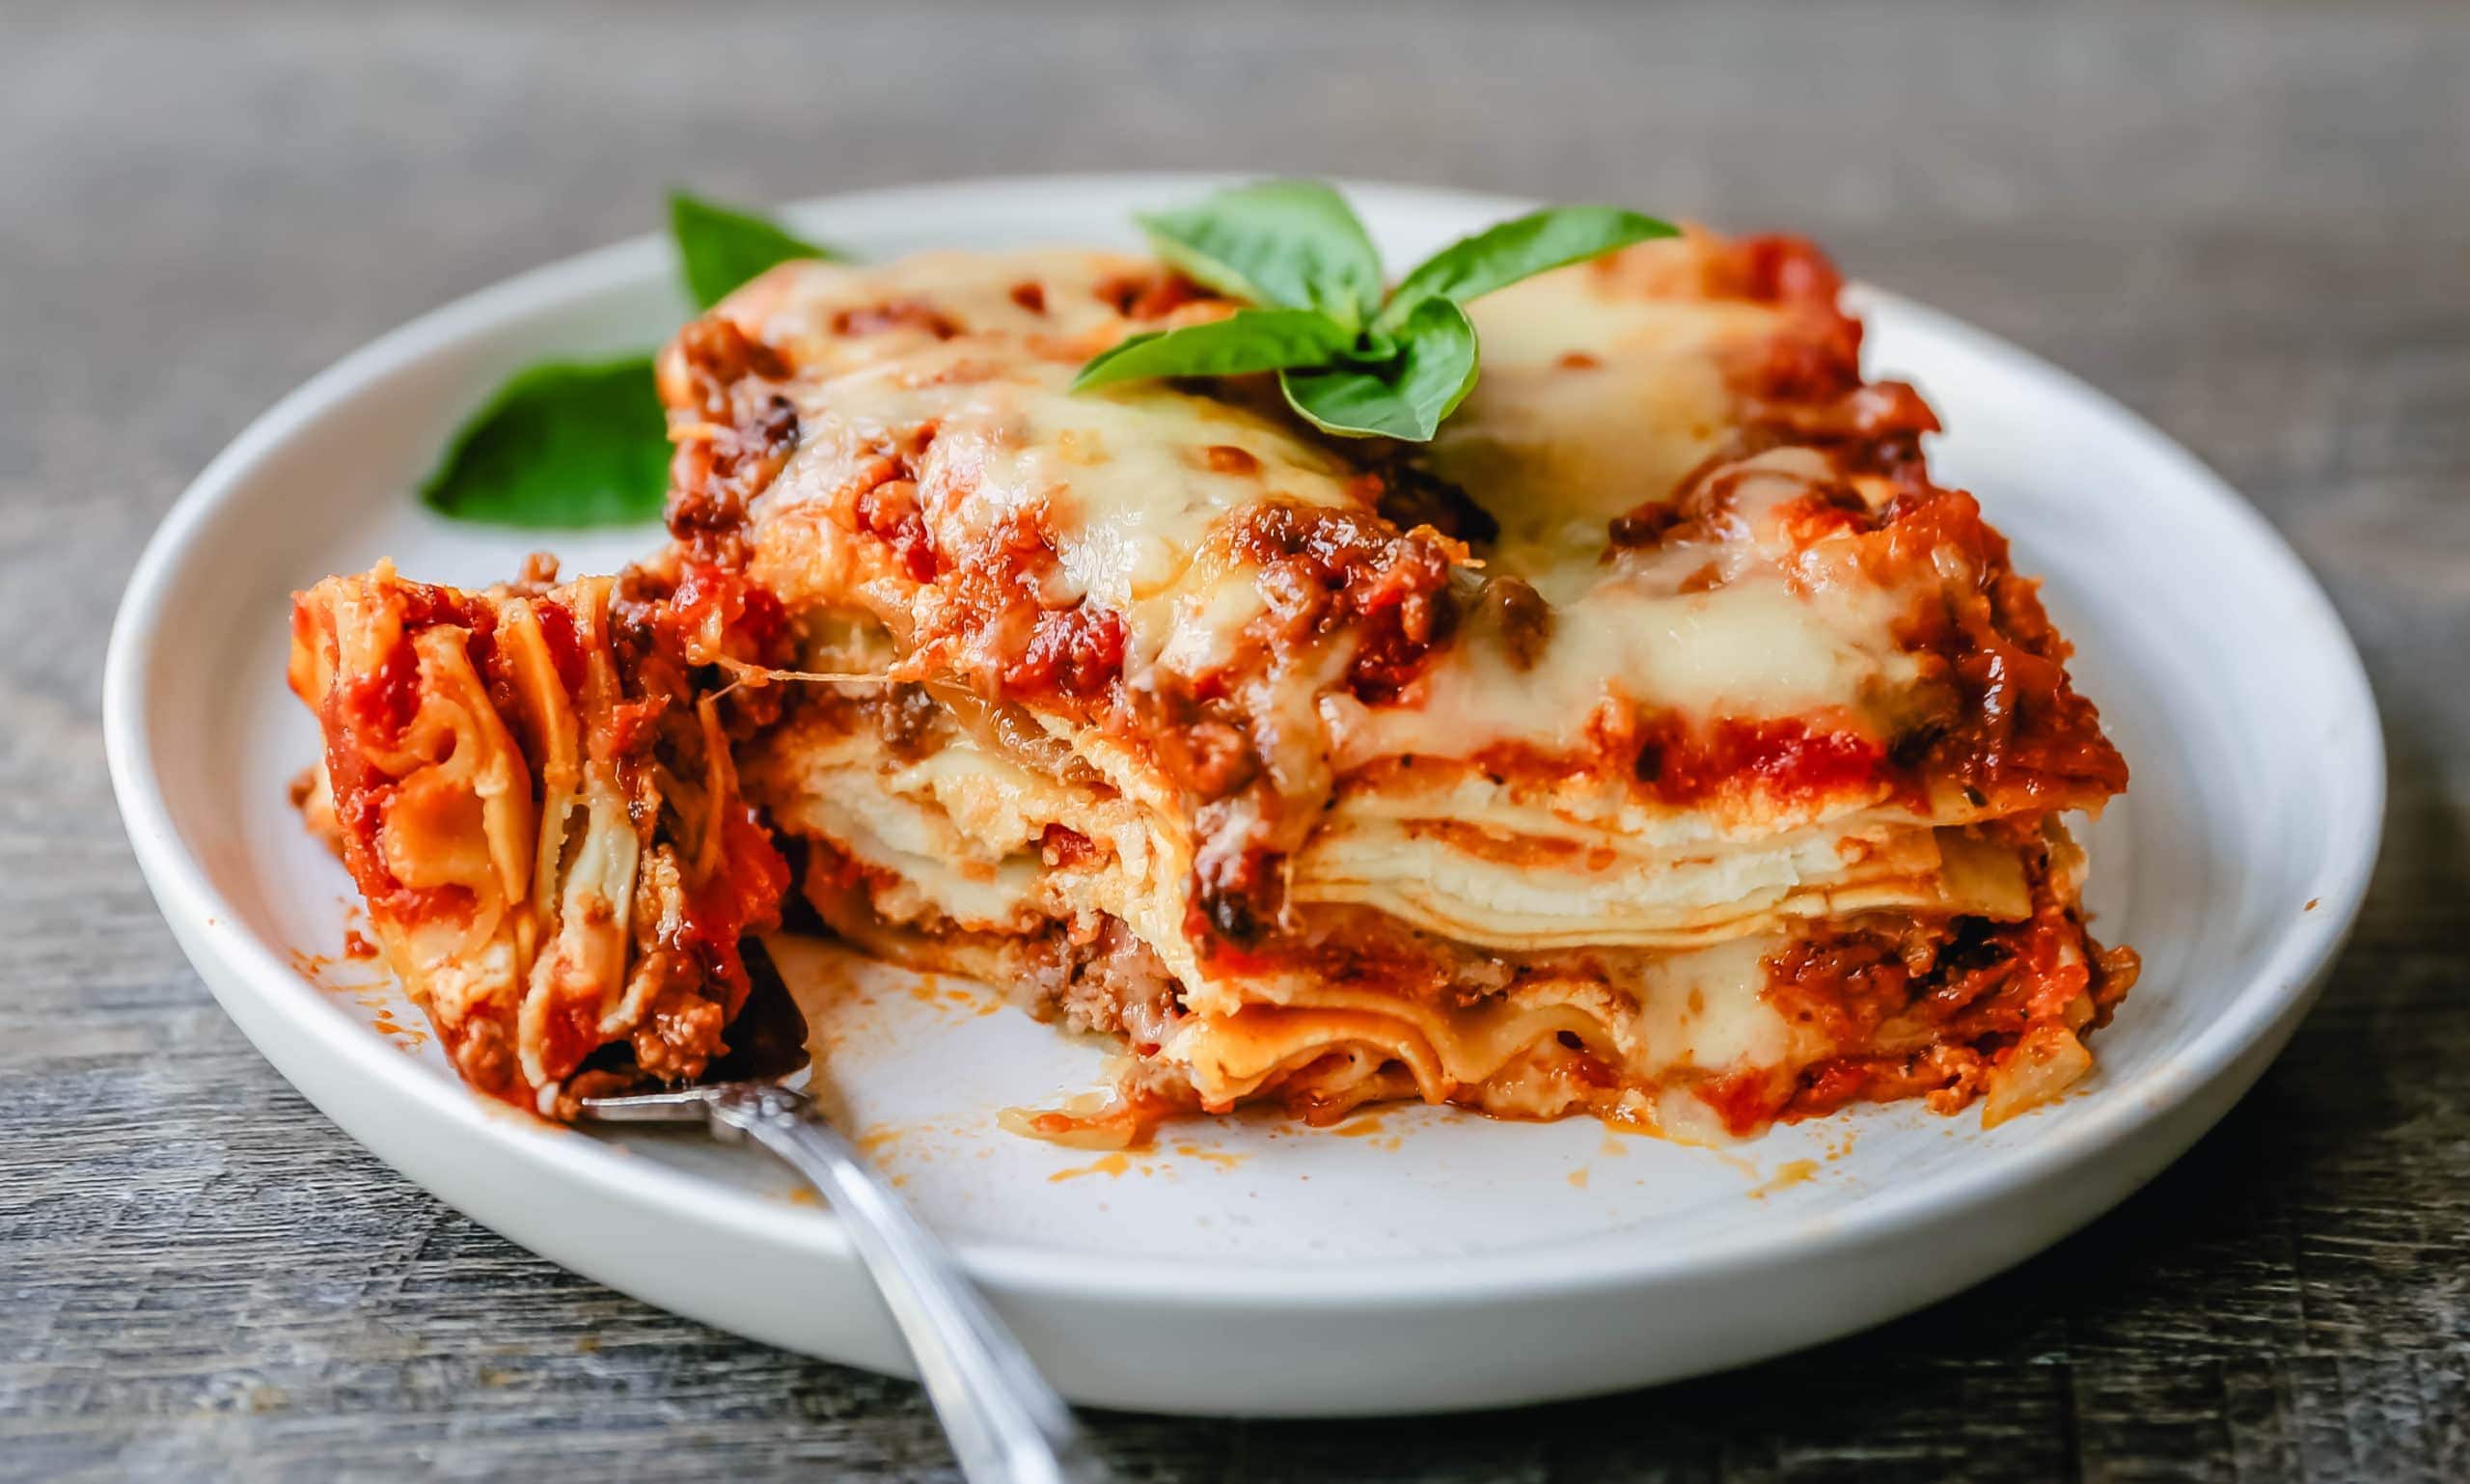 Indulge in the Tastes of Italy: Classic Italian Recipes to Make at Home